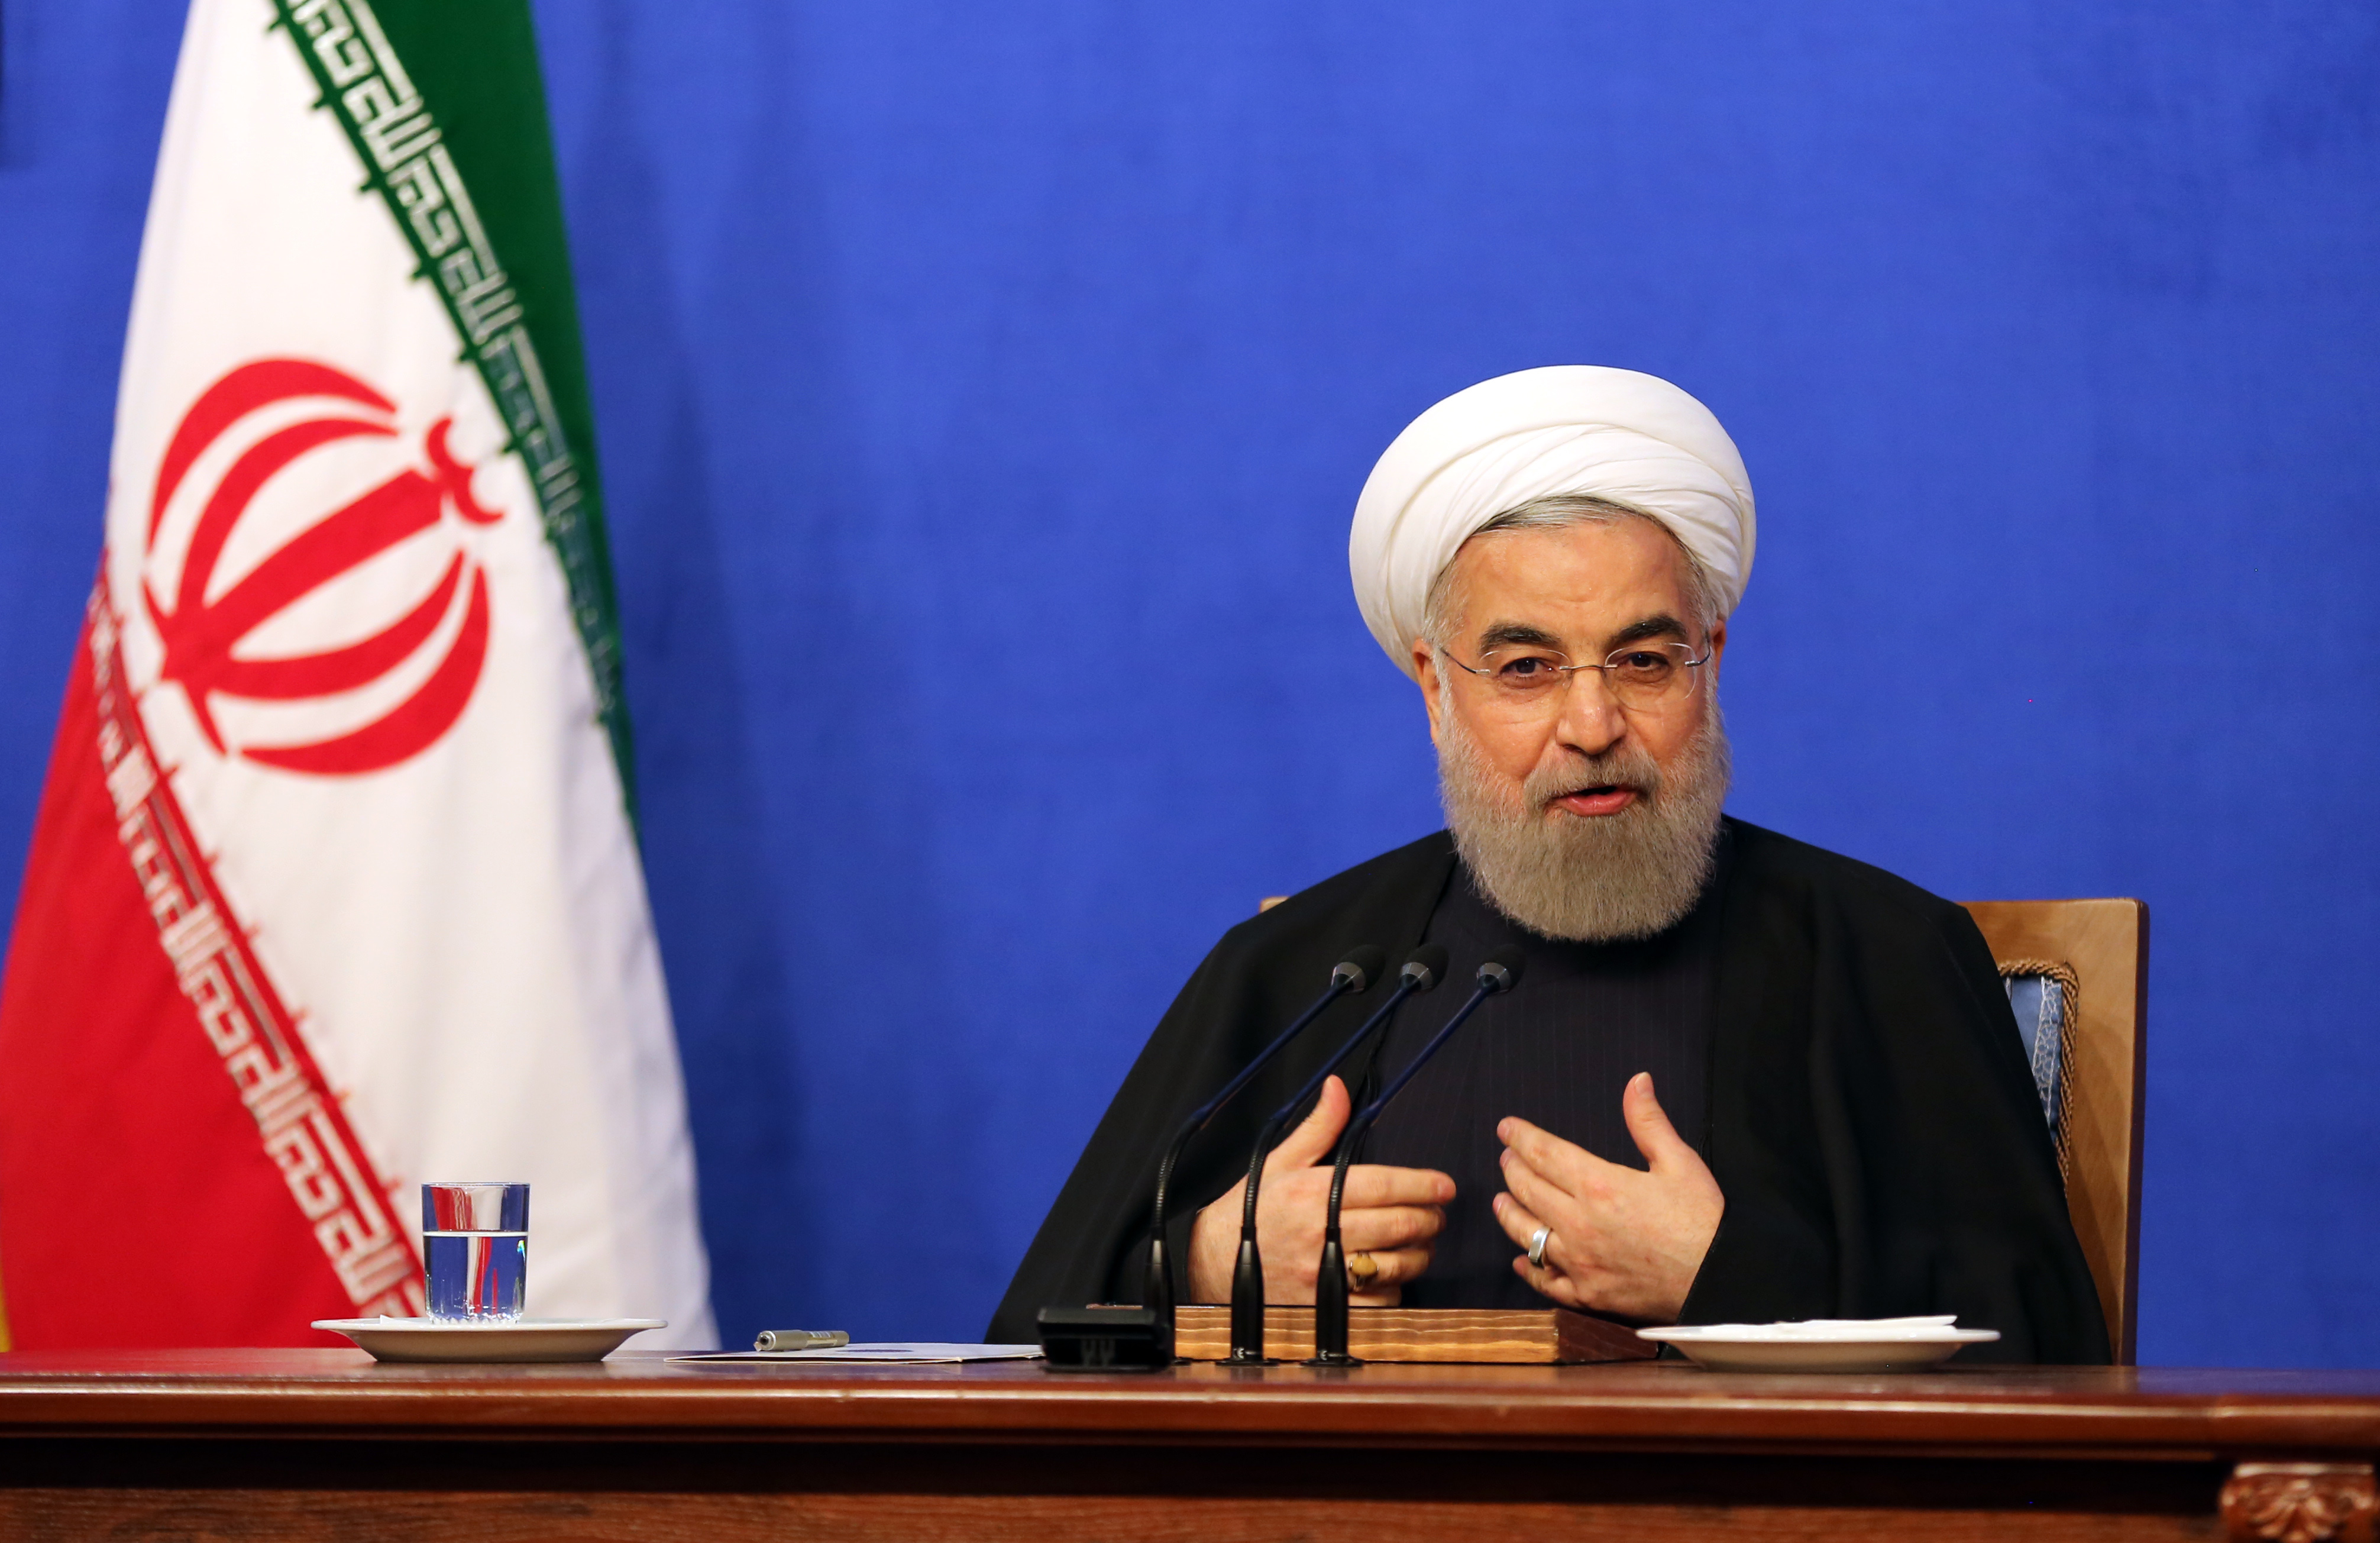 Rouhani is caught between disappointed reformists and restless conservatives.